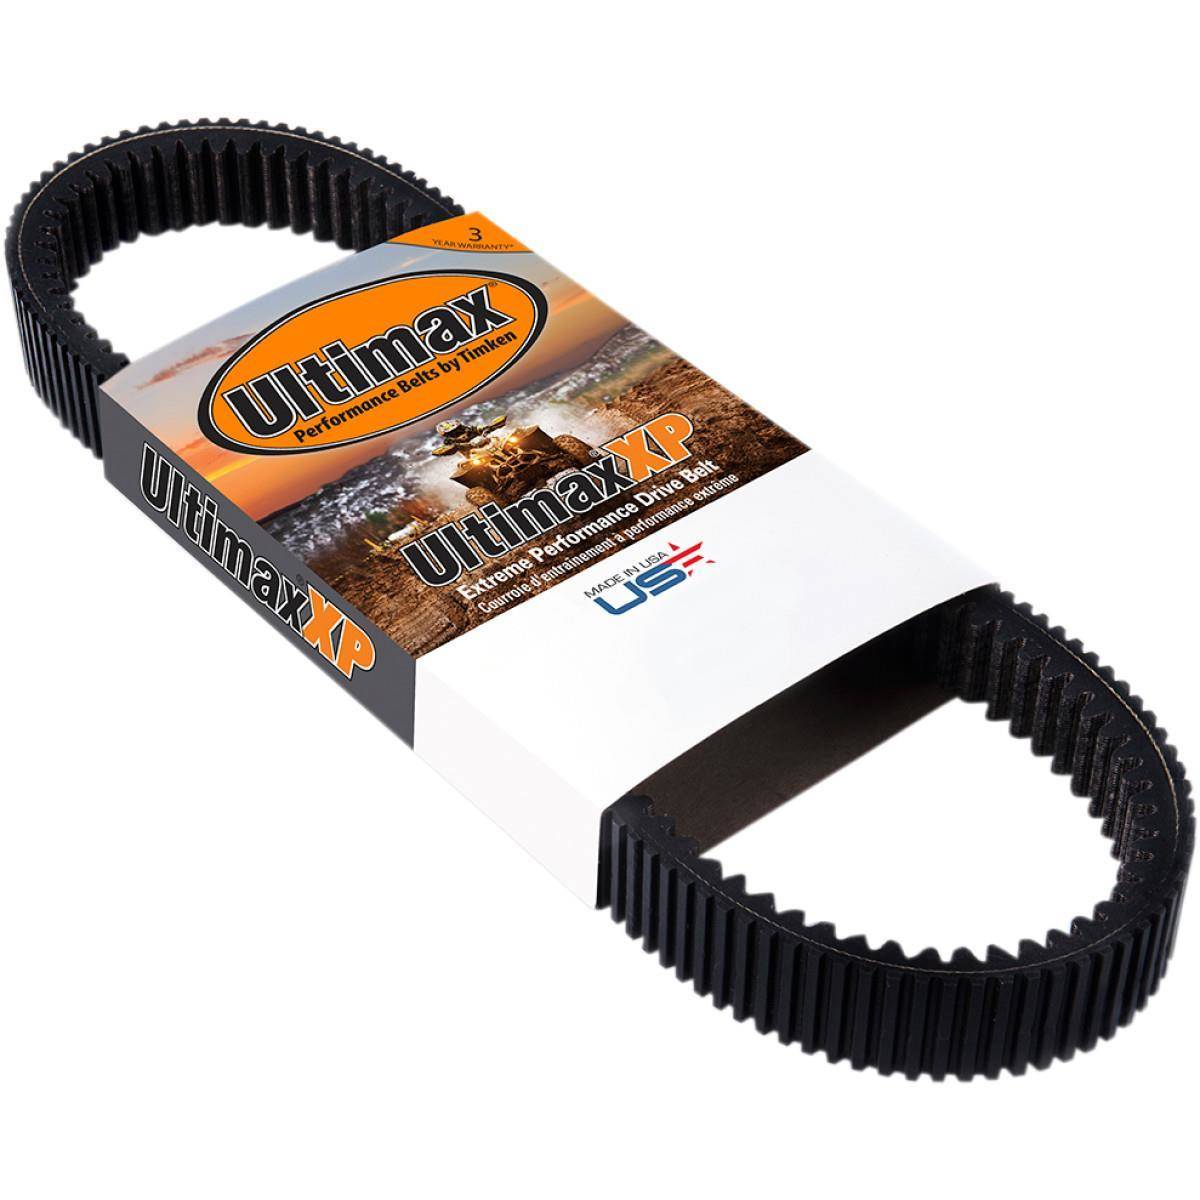 Details about   Ultimax Xs Drive Belt For 2008 Polaris FS IQ Touring Snowmobile Carlisle XS813 